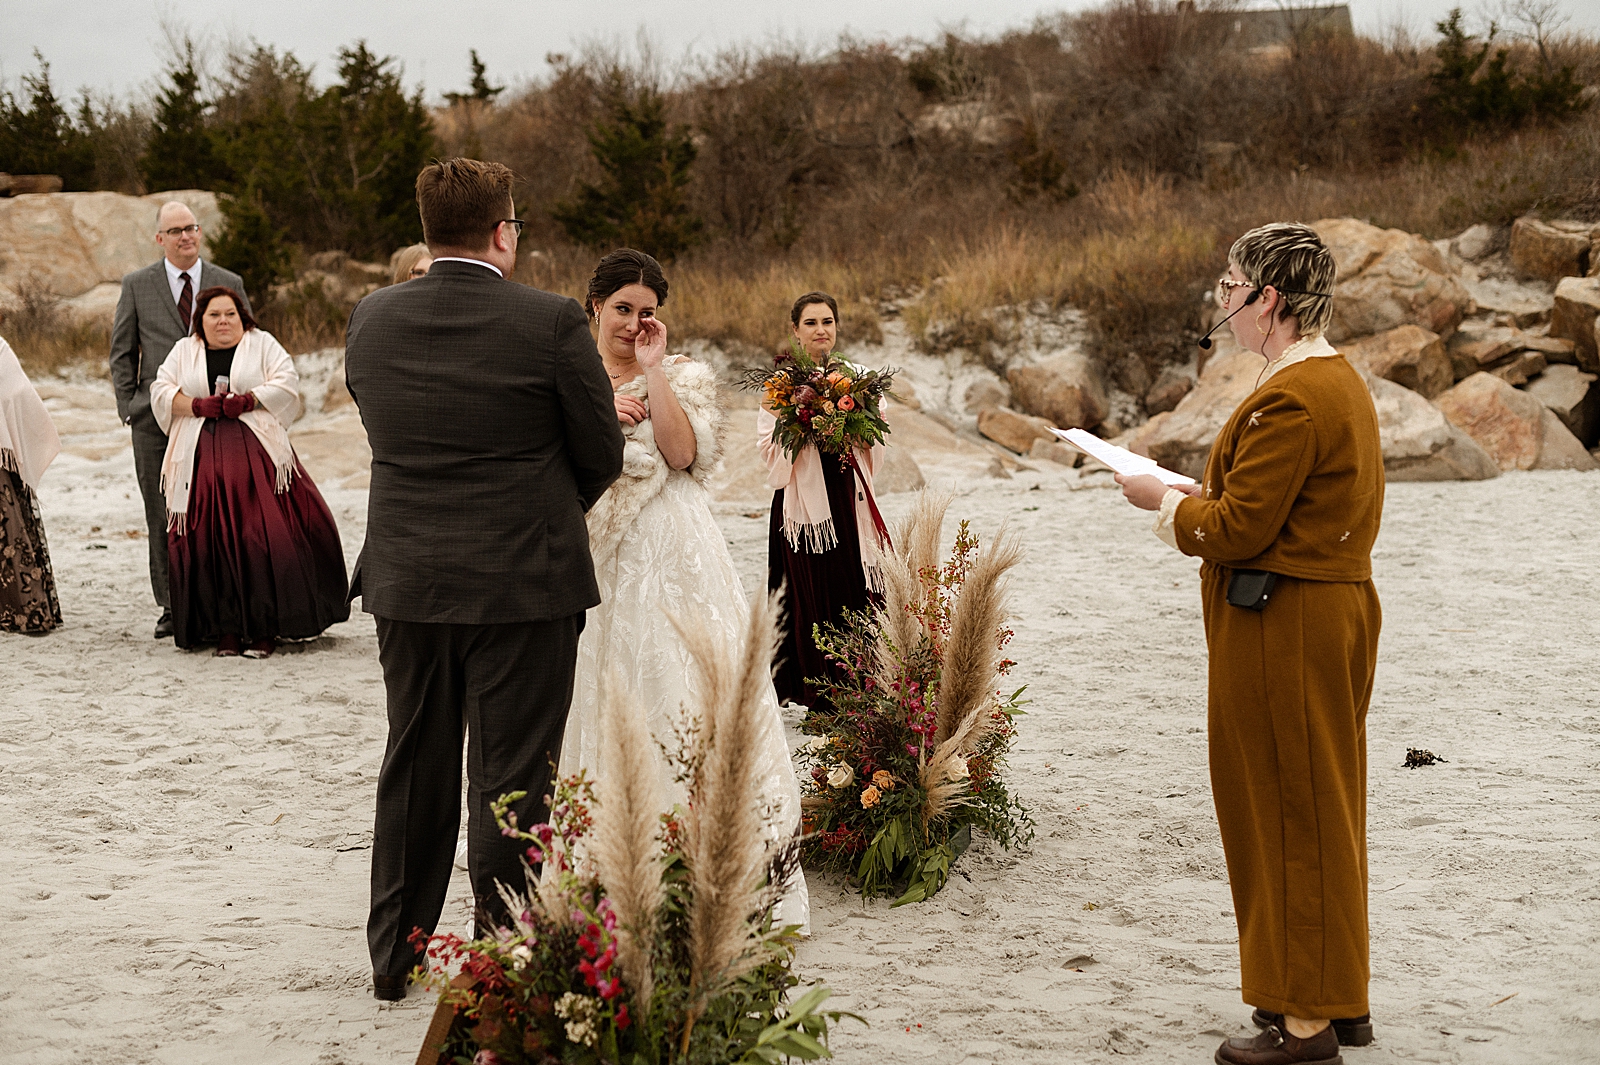 Bride crying during Elopement Ceremony on beach